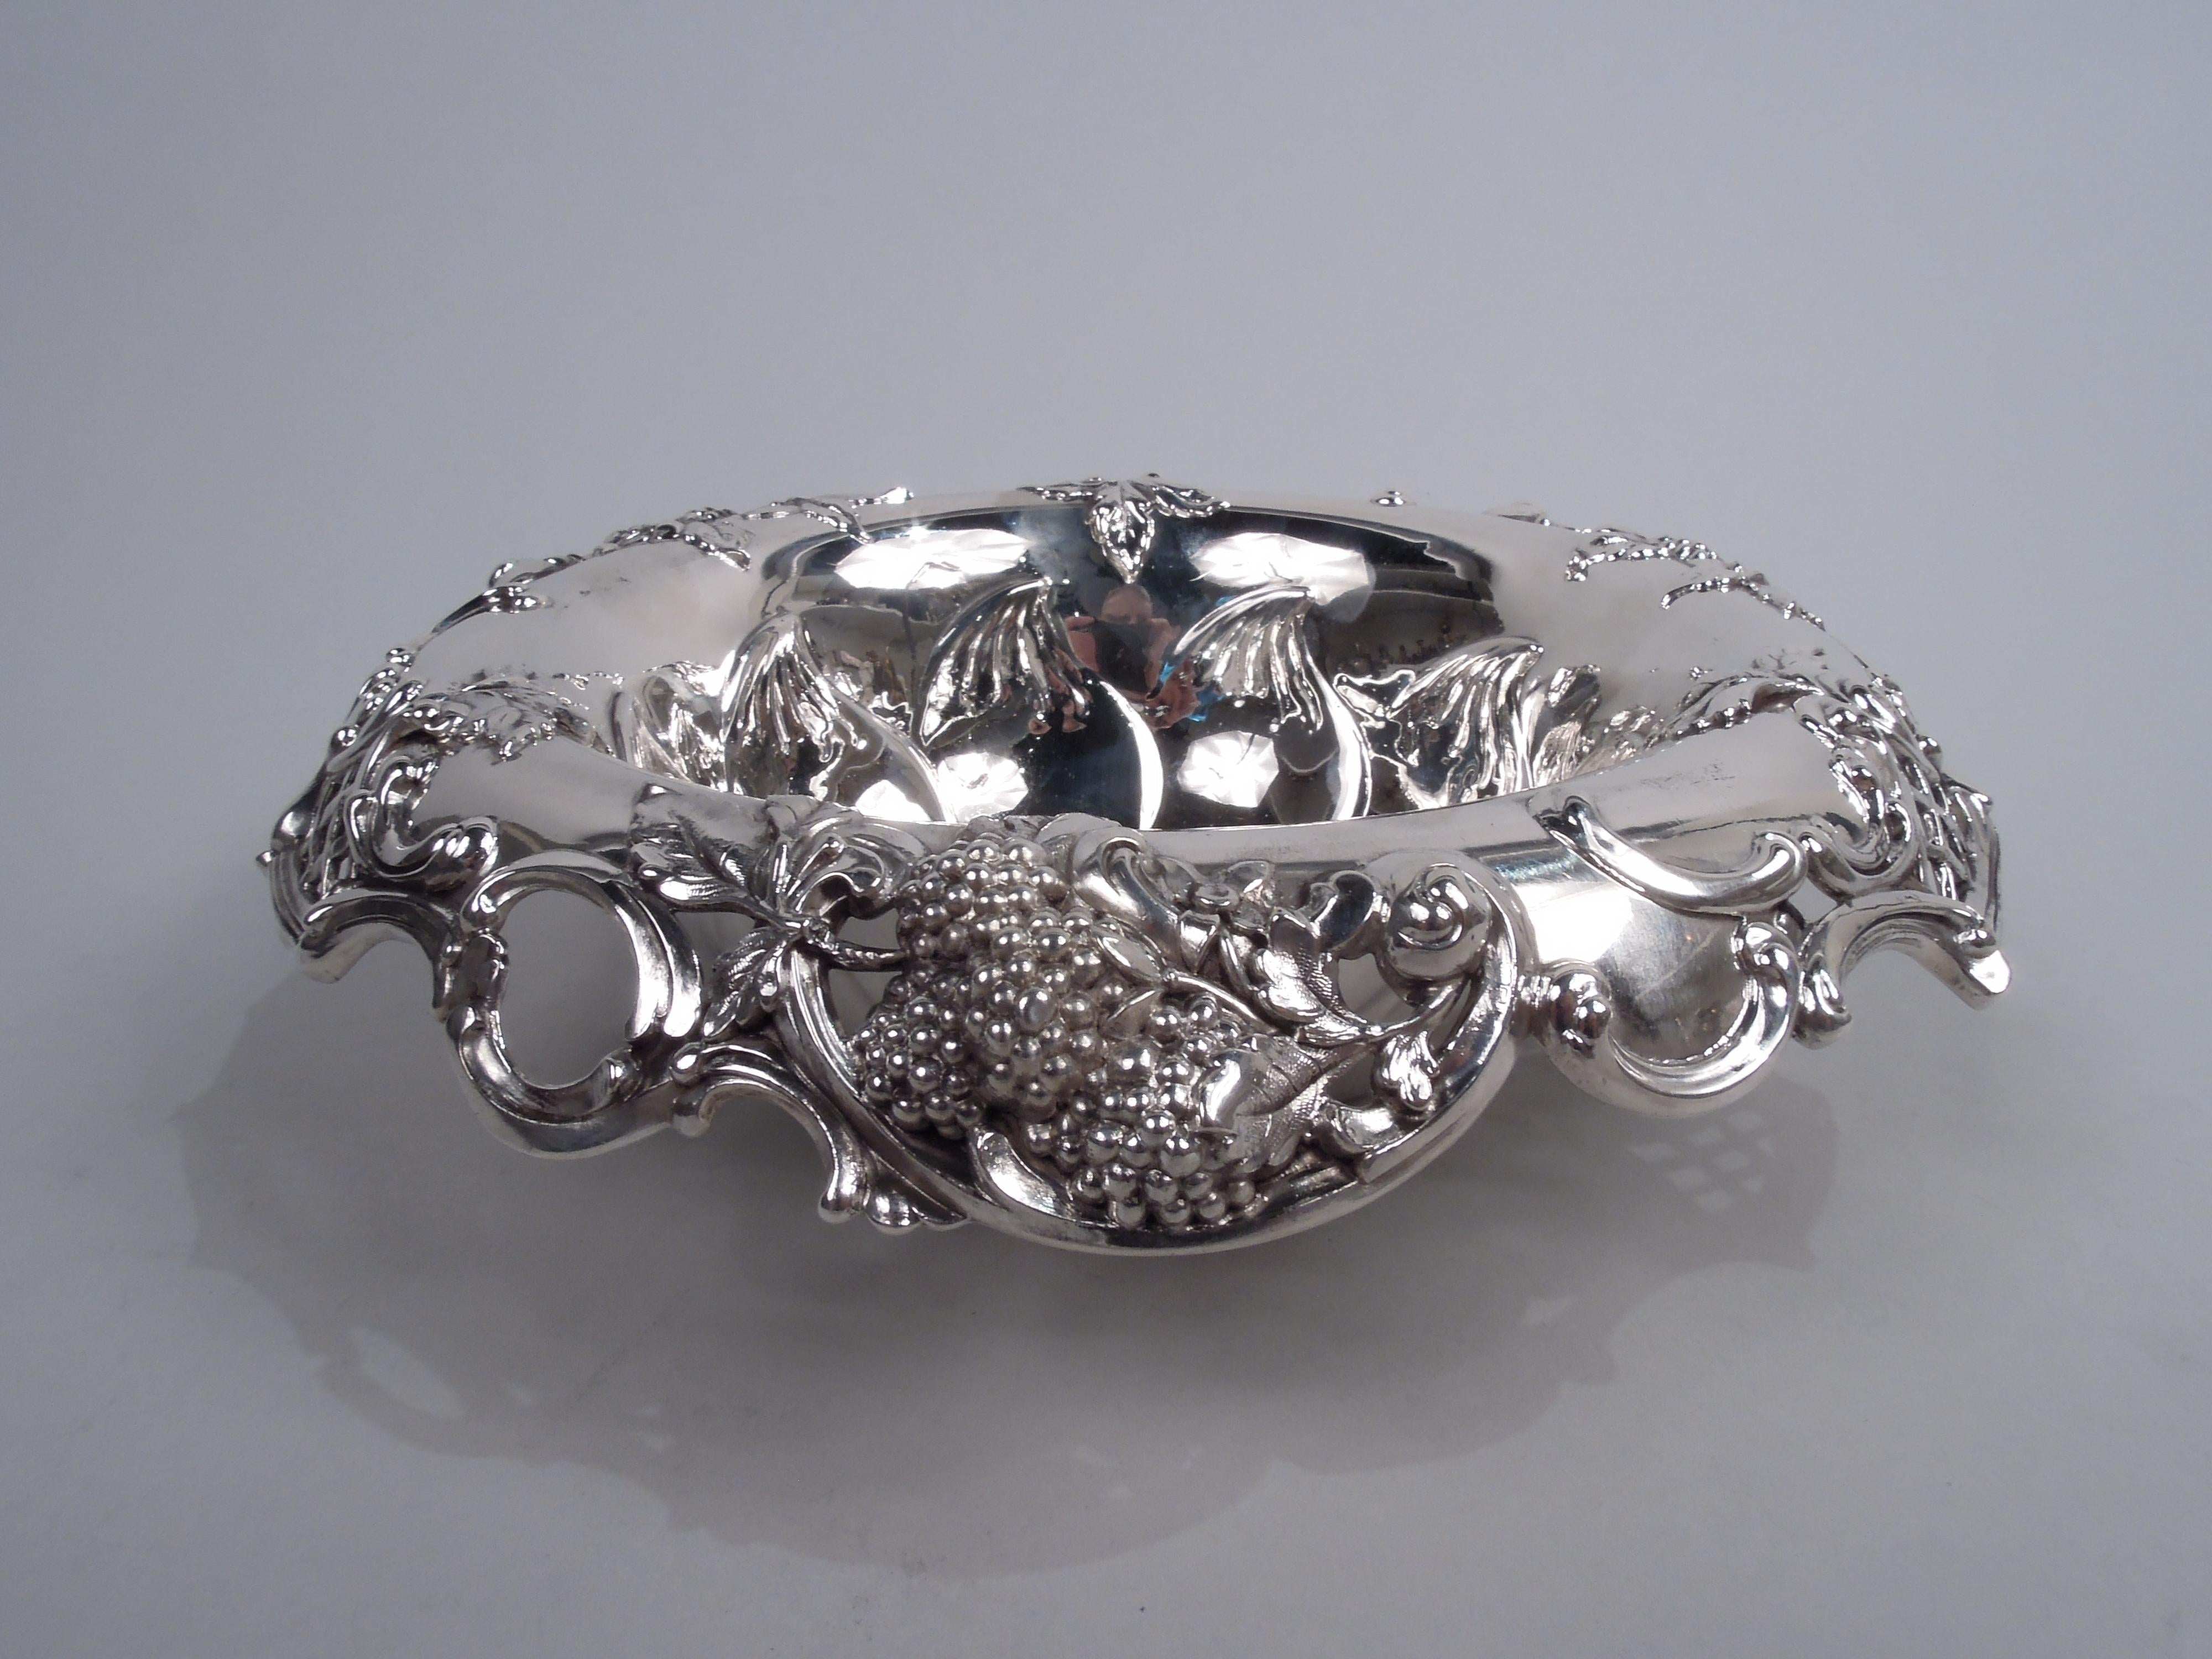 Gilded Age sterling silver blackberry bowl. Made by Tiffany & Co. in New York. Round well; sides tapering with chased outsized leaf border. Scrolled and open turned down rim with applied c-scrolls, leaves, berries, and diaper. A great high-low